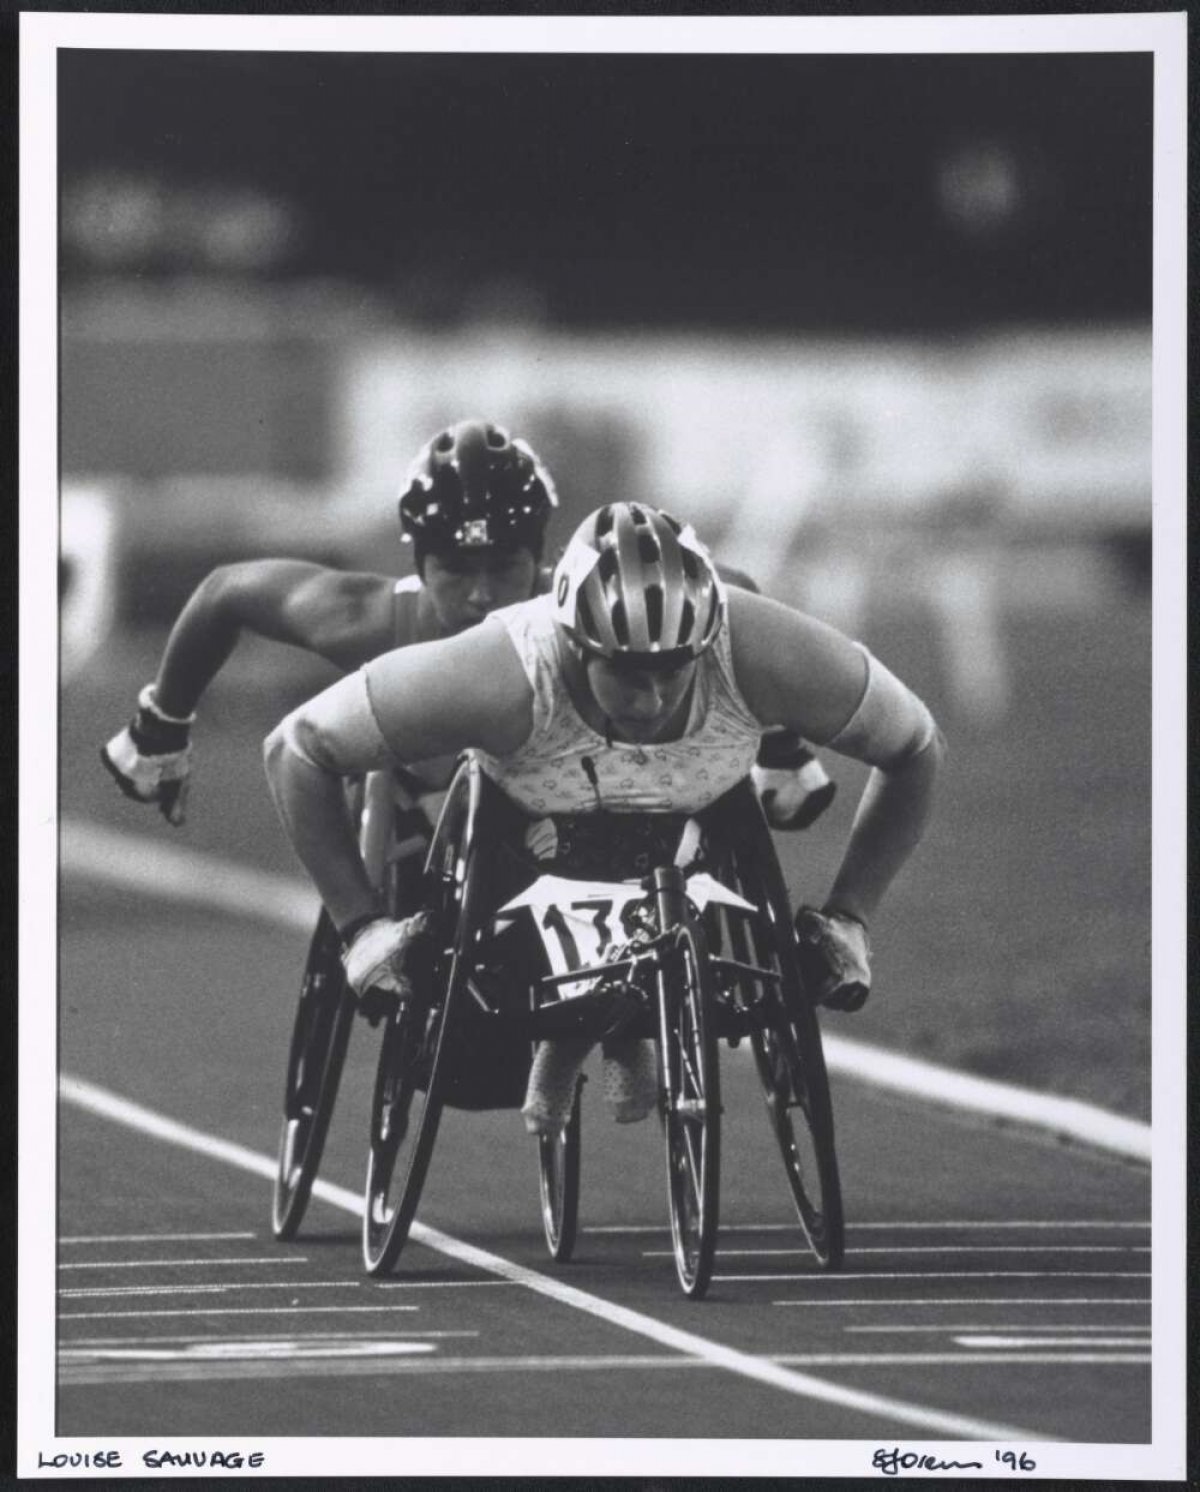 A black and white photo of Louise Sauvage leading another wheelchair racer on a track.